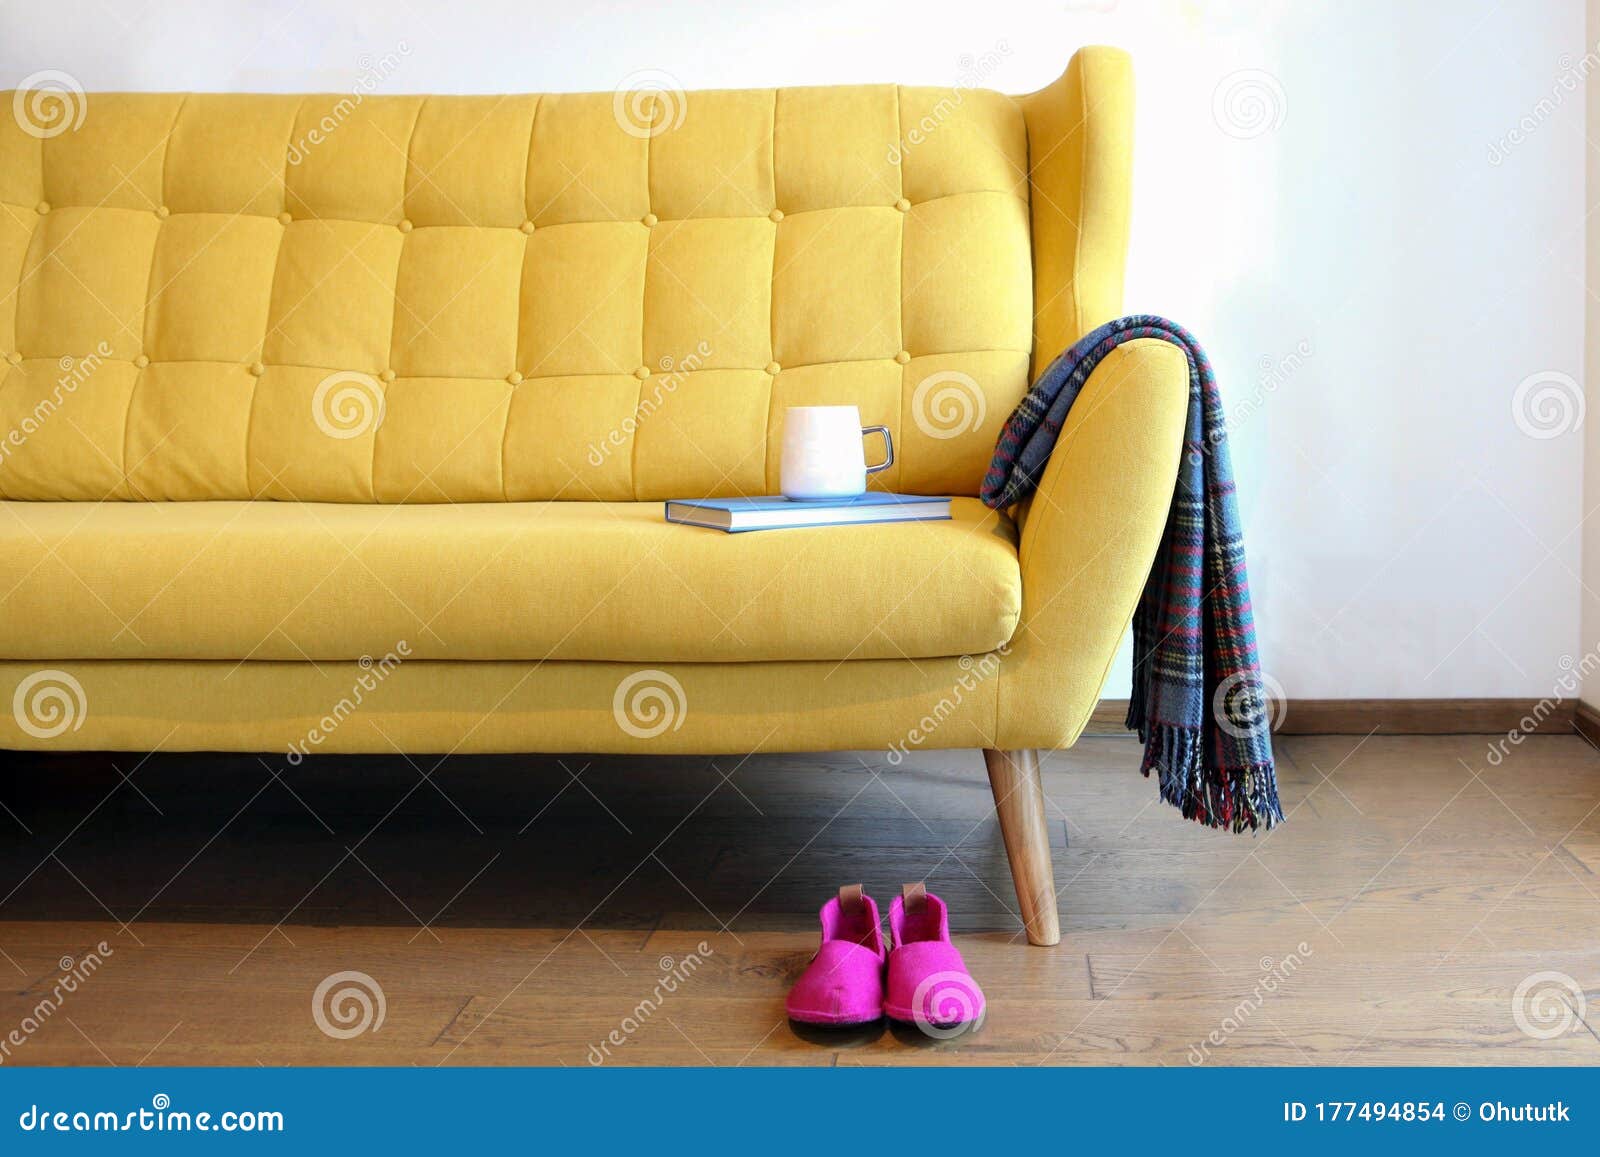 Cup of Tea and Blue Book on a Yellow Coach. Still Life Details in Home  Interior of Living Room Stock Photo - Image of blanket, furnitured:  177494854